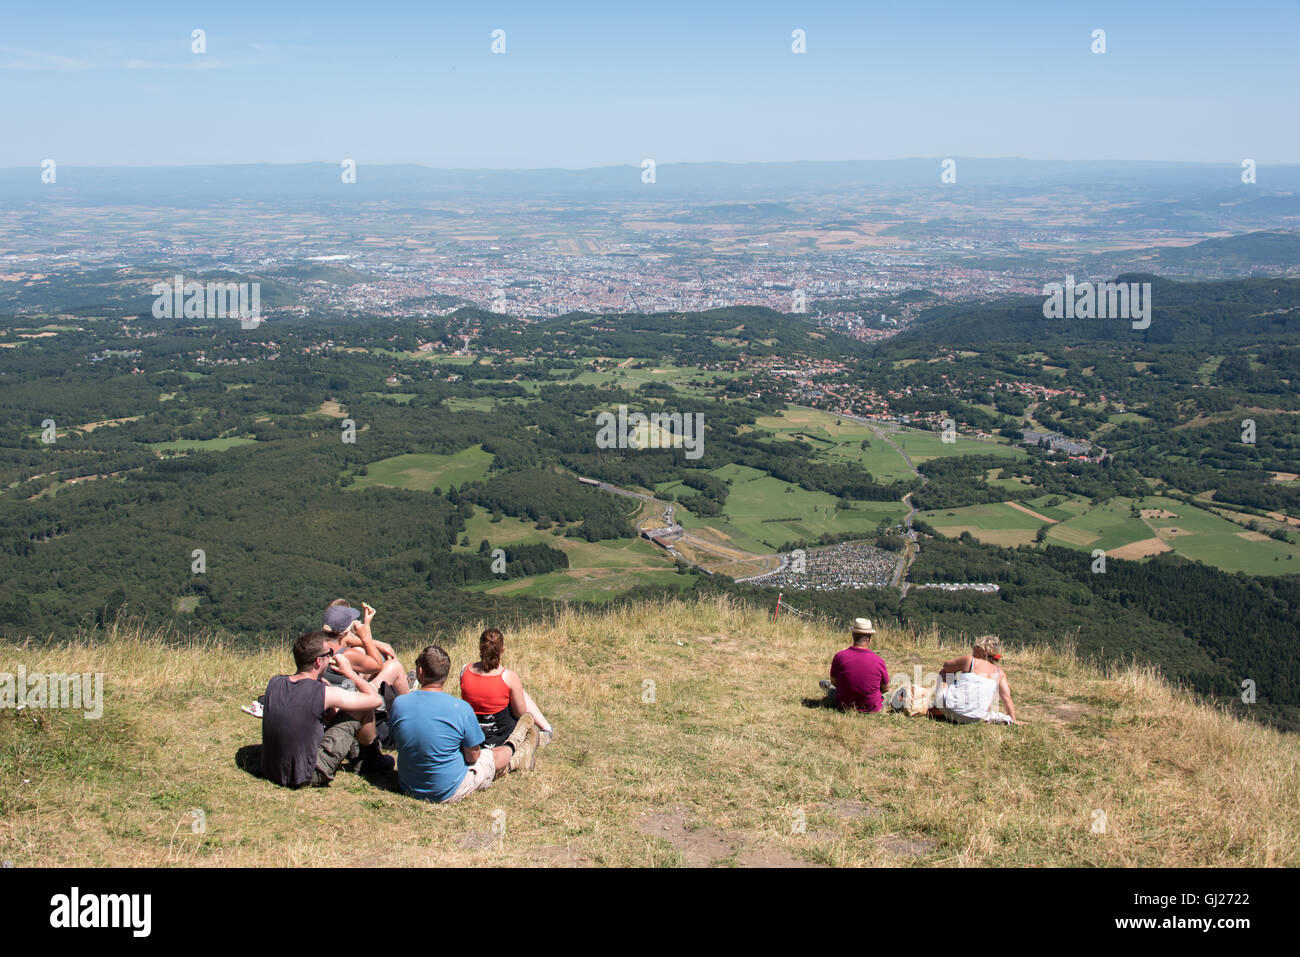 Families sat enjoying the view from the summit of Puy de Dome volcano in the Auvergne region of France Stock Photo